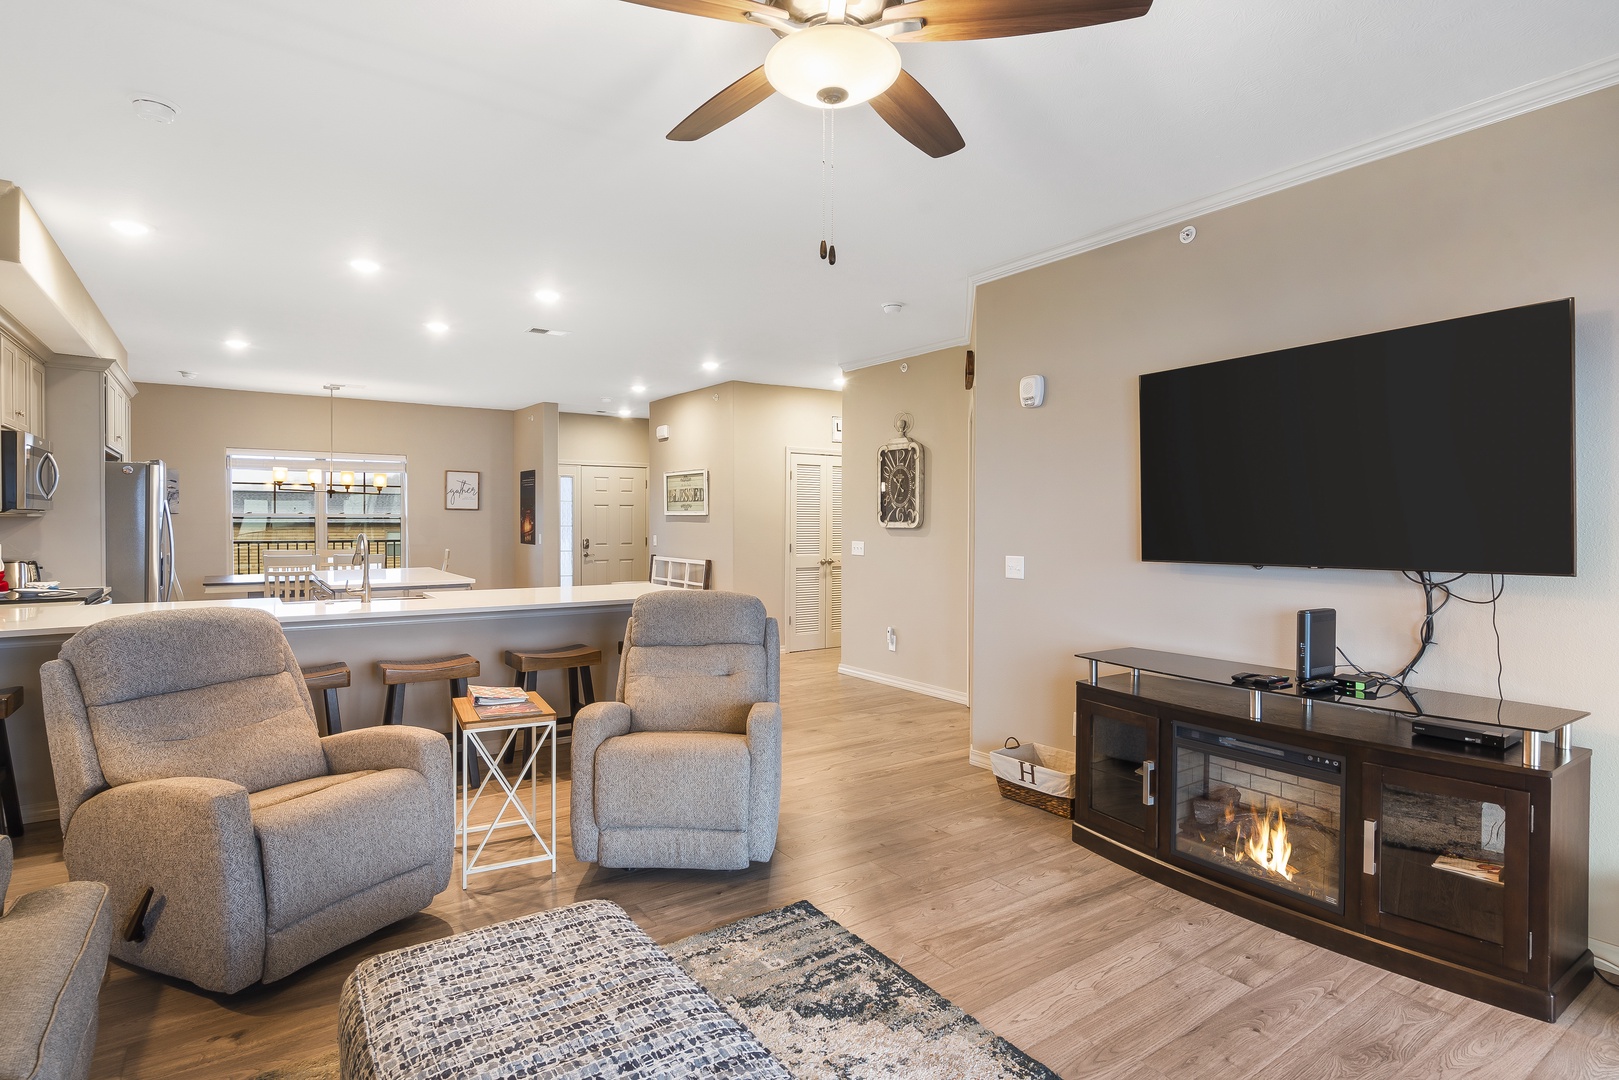 Curl up in the inviting living room & stream your favorites by the fireplace